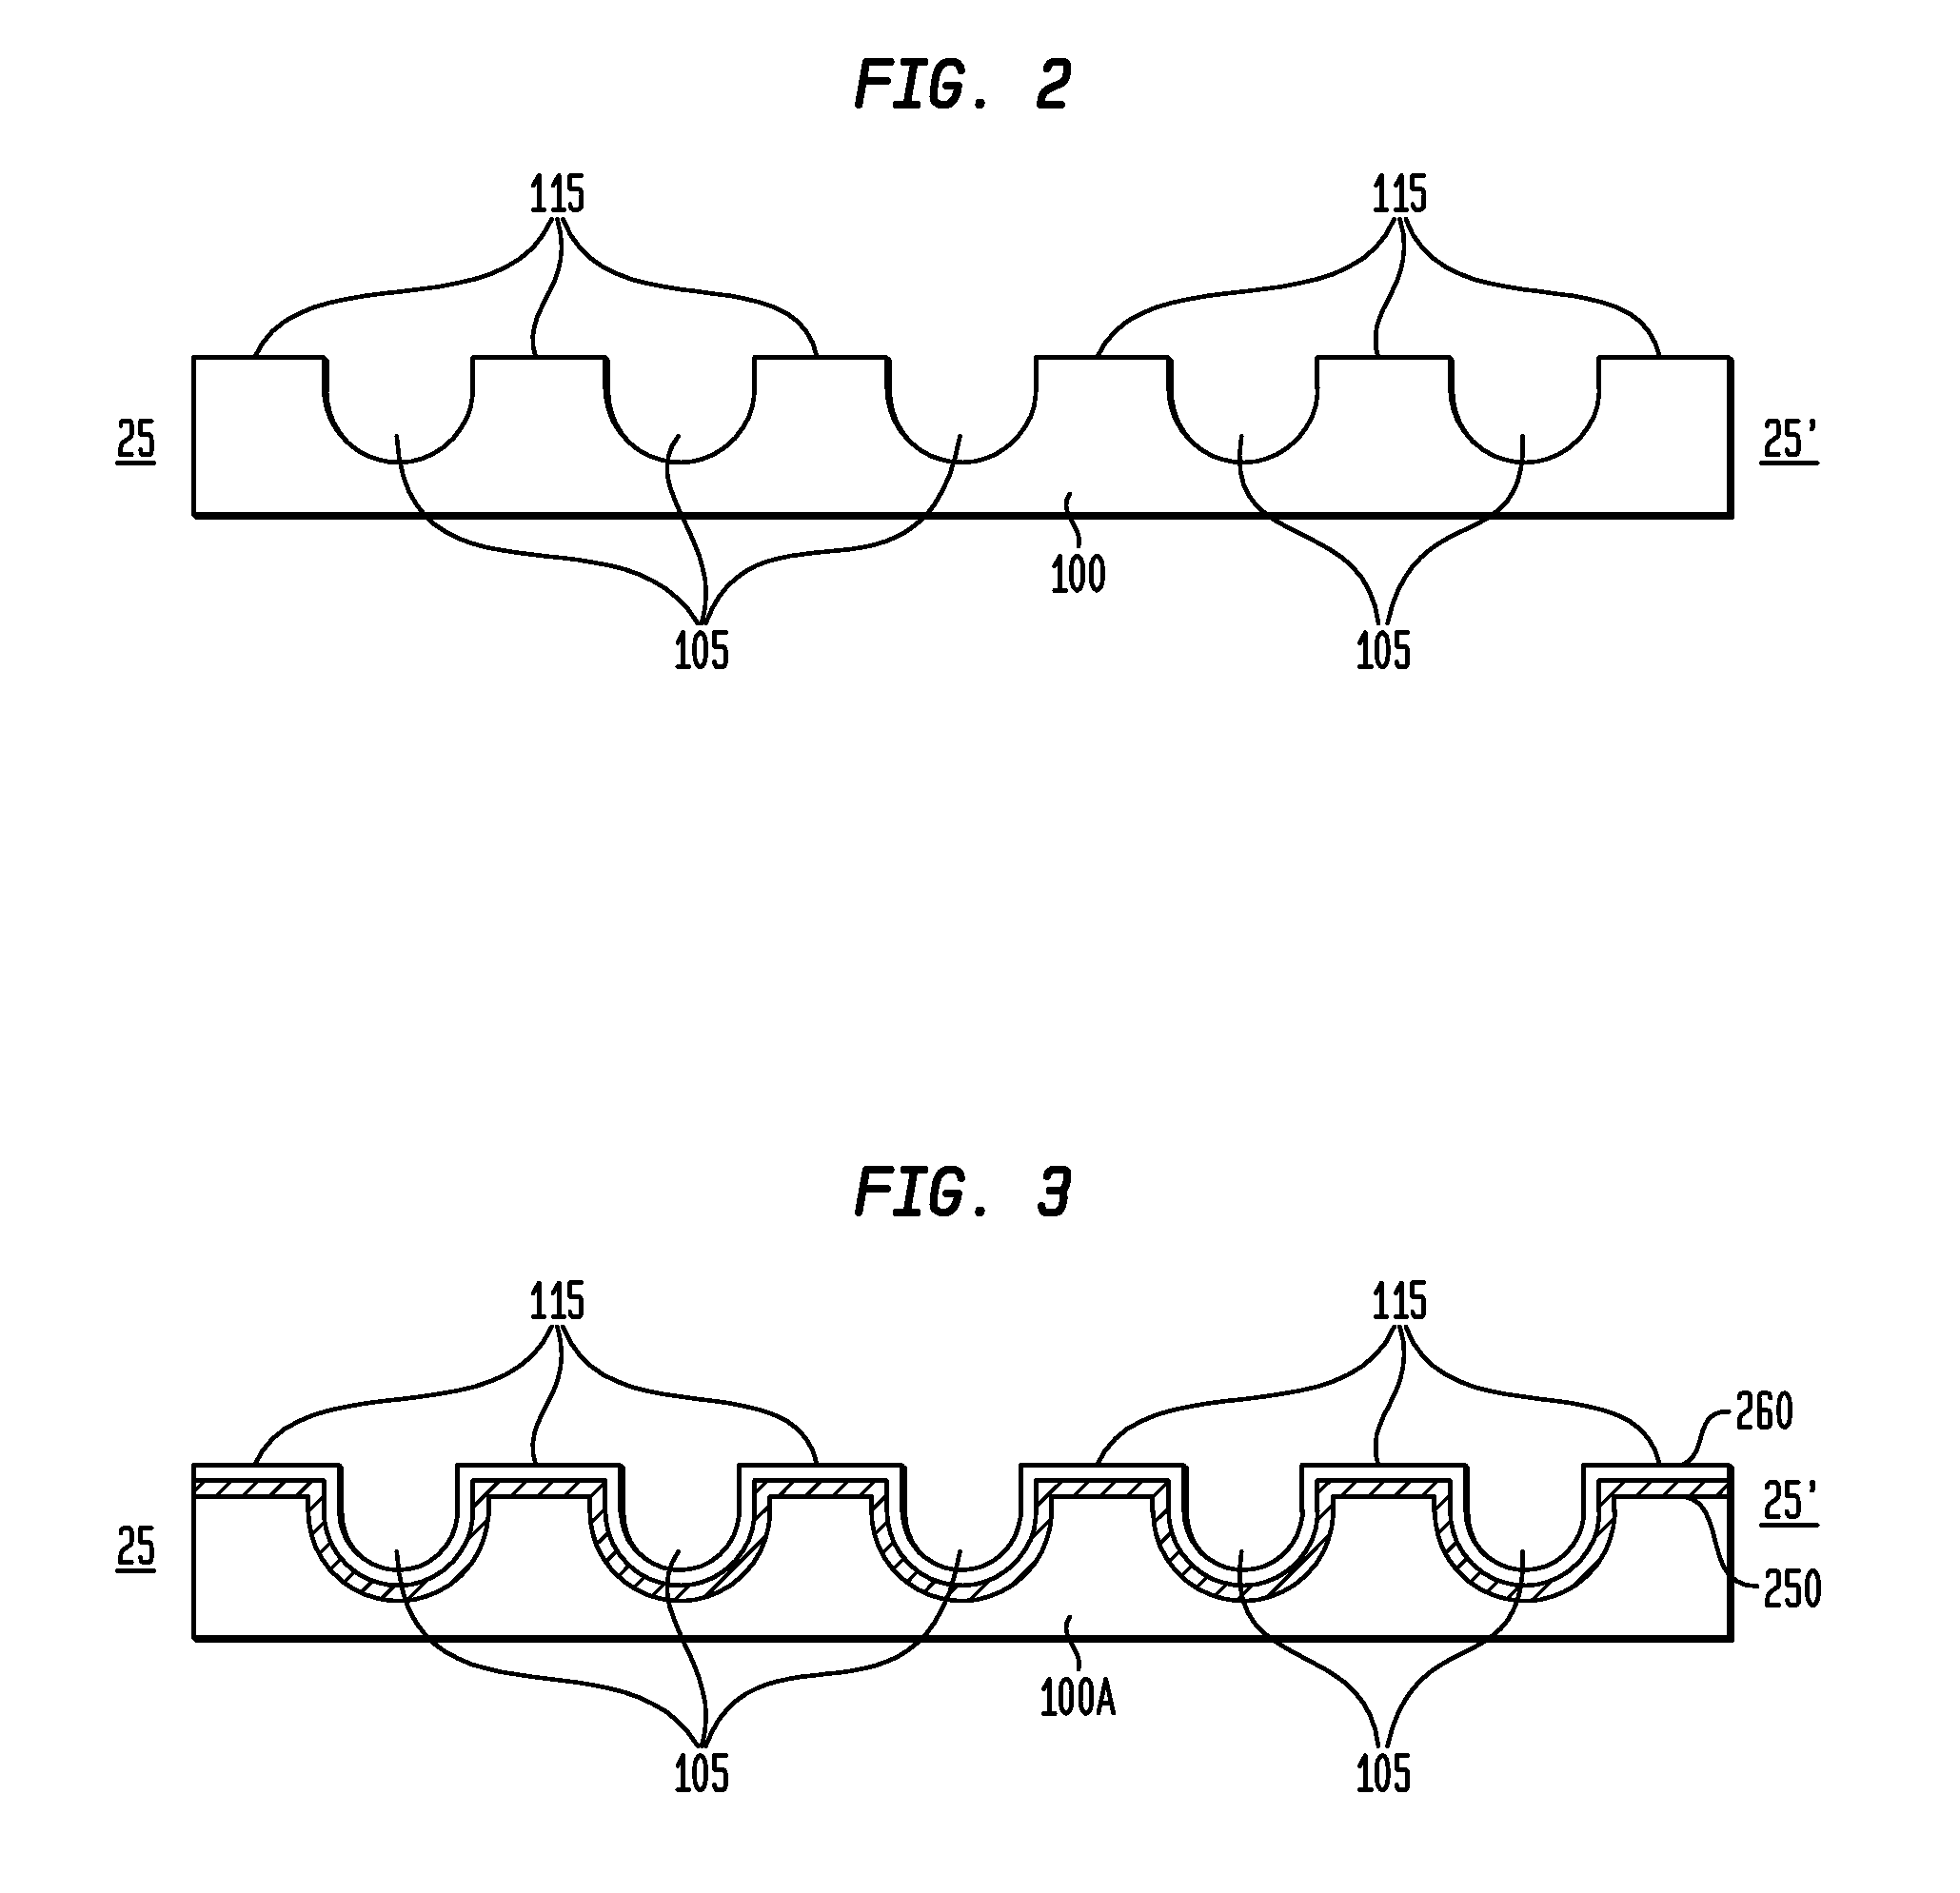 Method of Manufacturing a Light Emitting, Photovoltaic or Other Electronic Apparatus and System